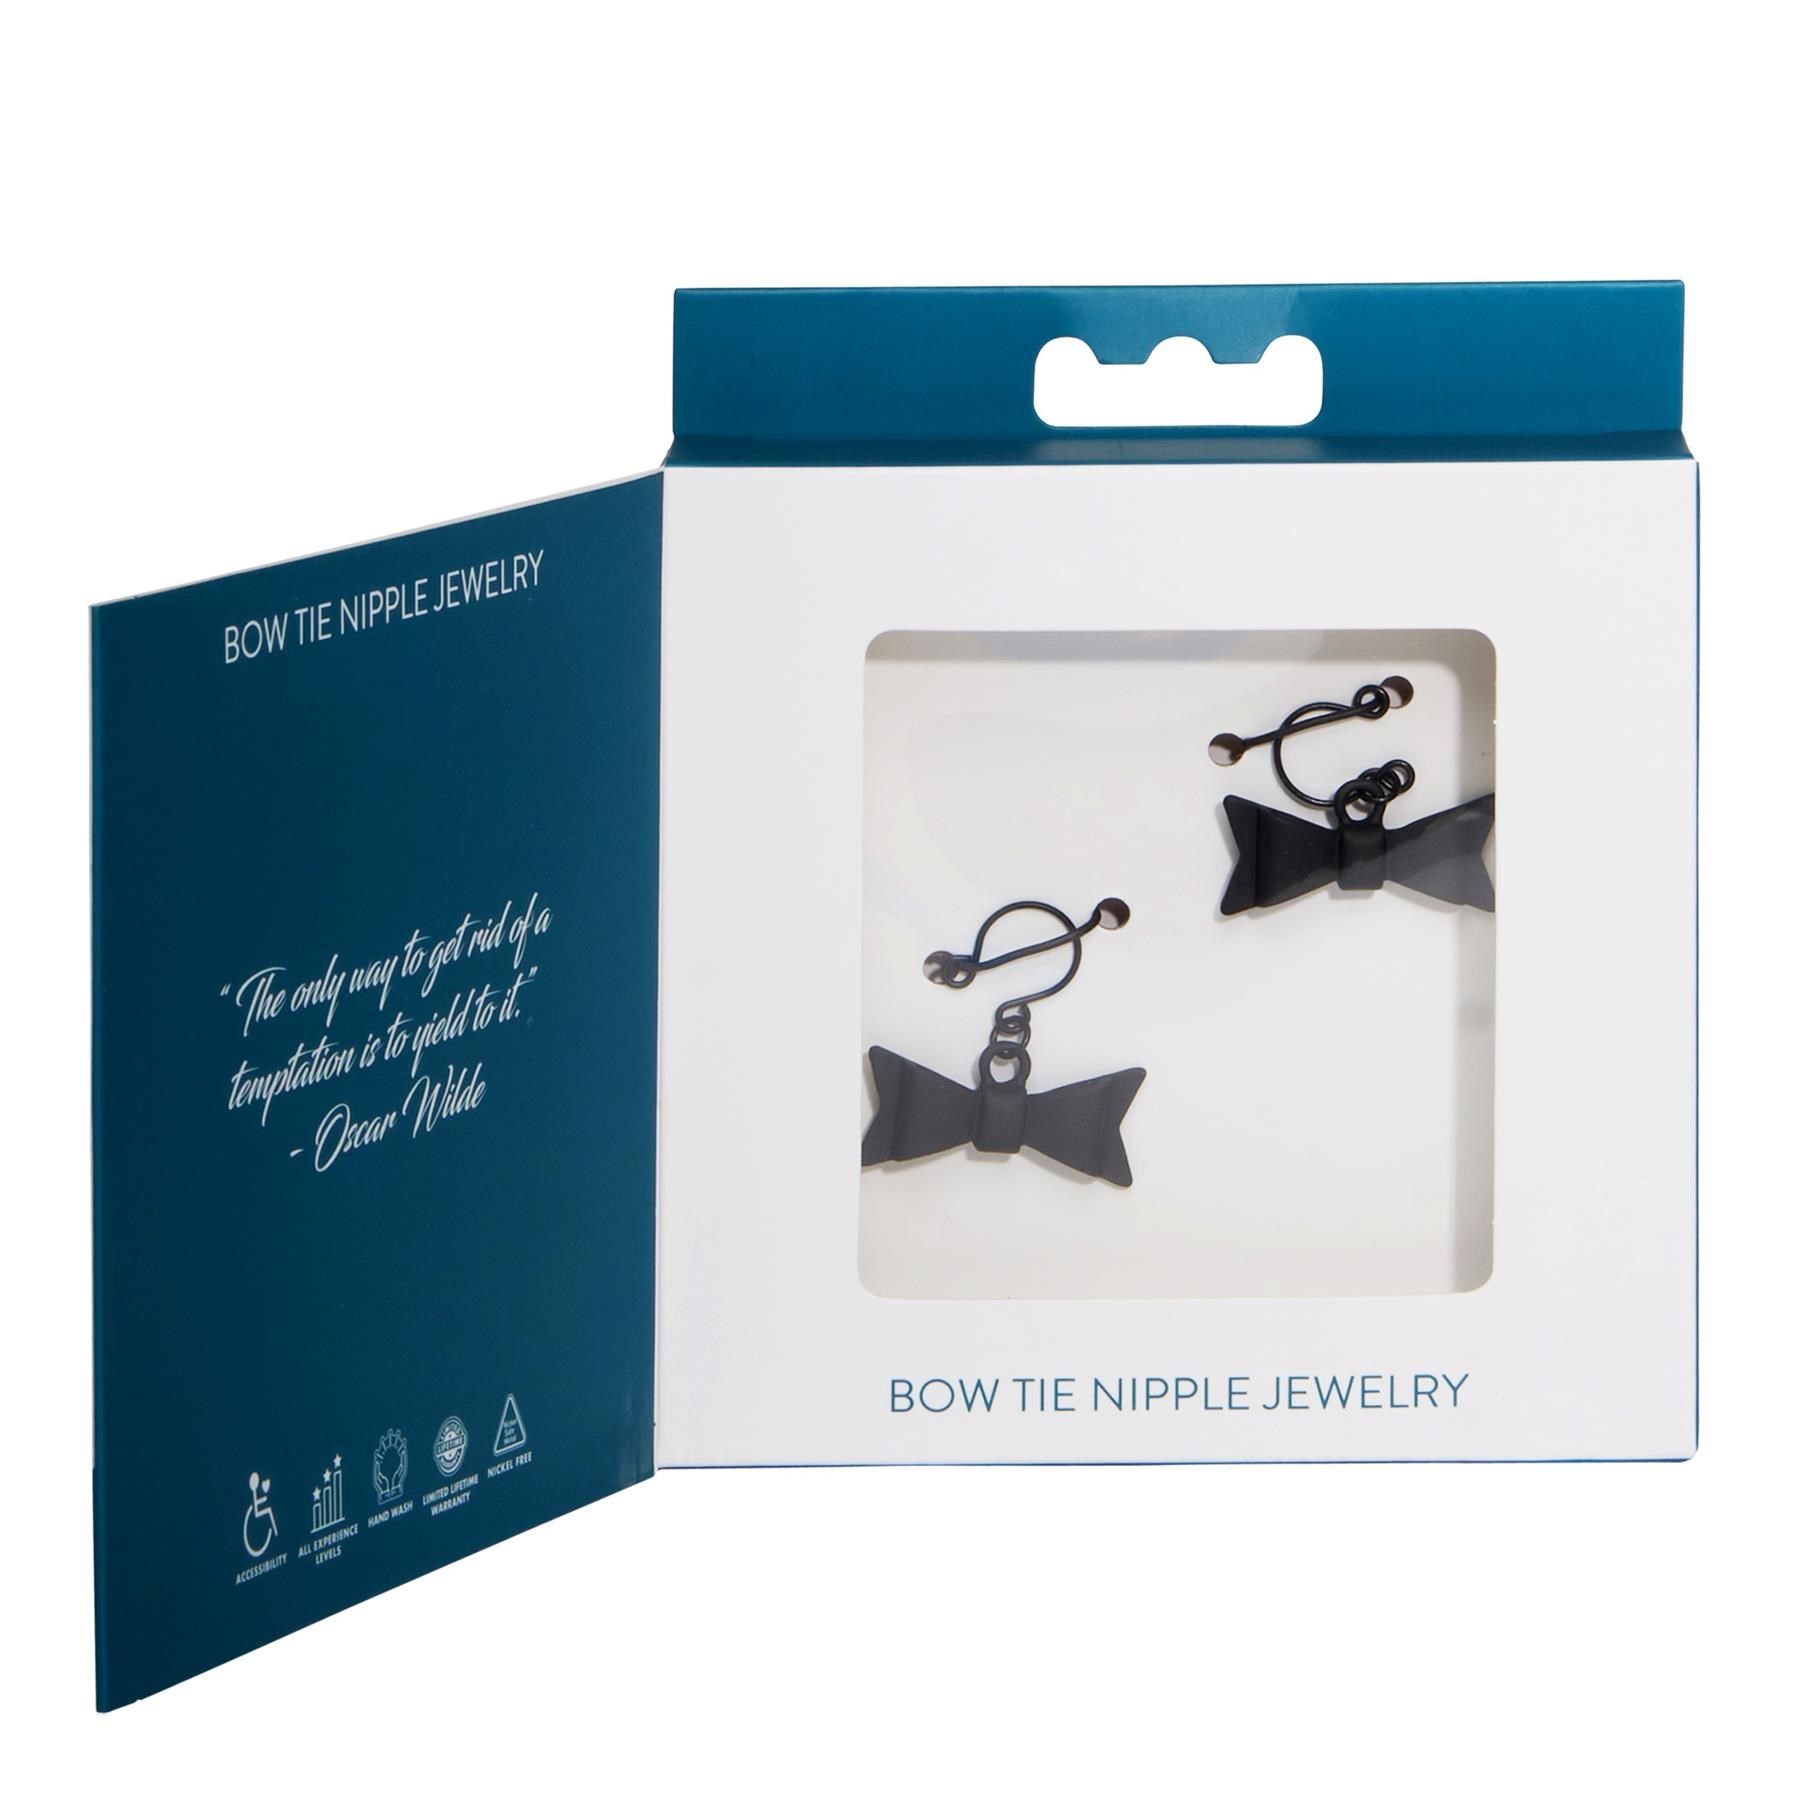 Sincerely Bow Tie Nipple Jewelry - Open Box Shot